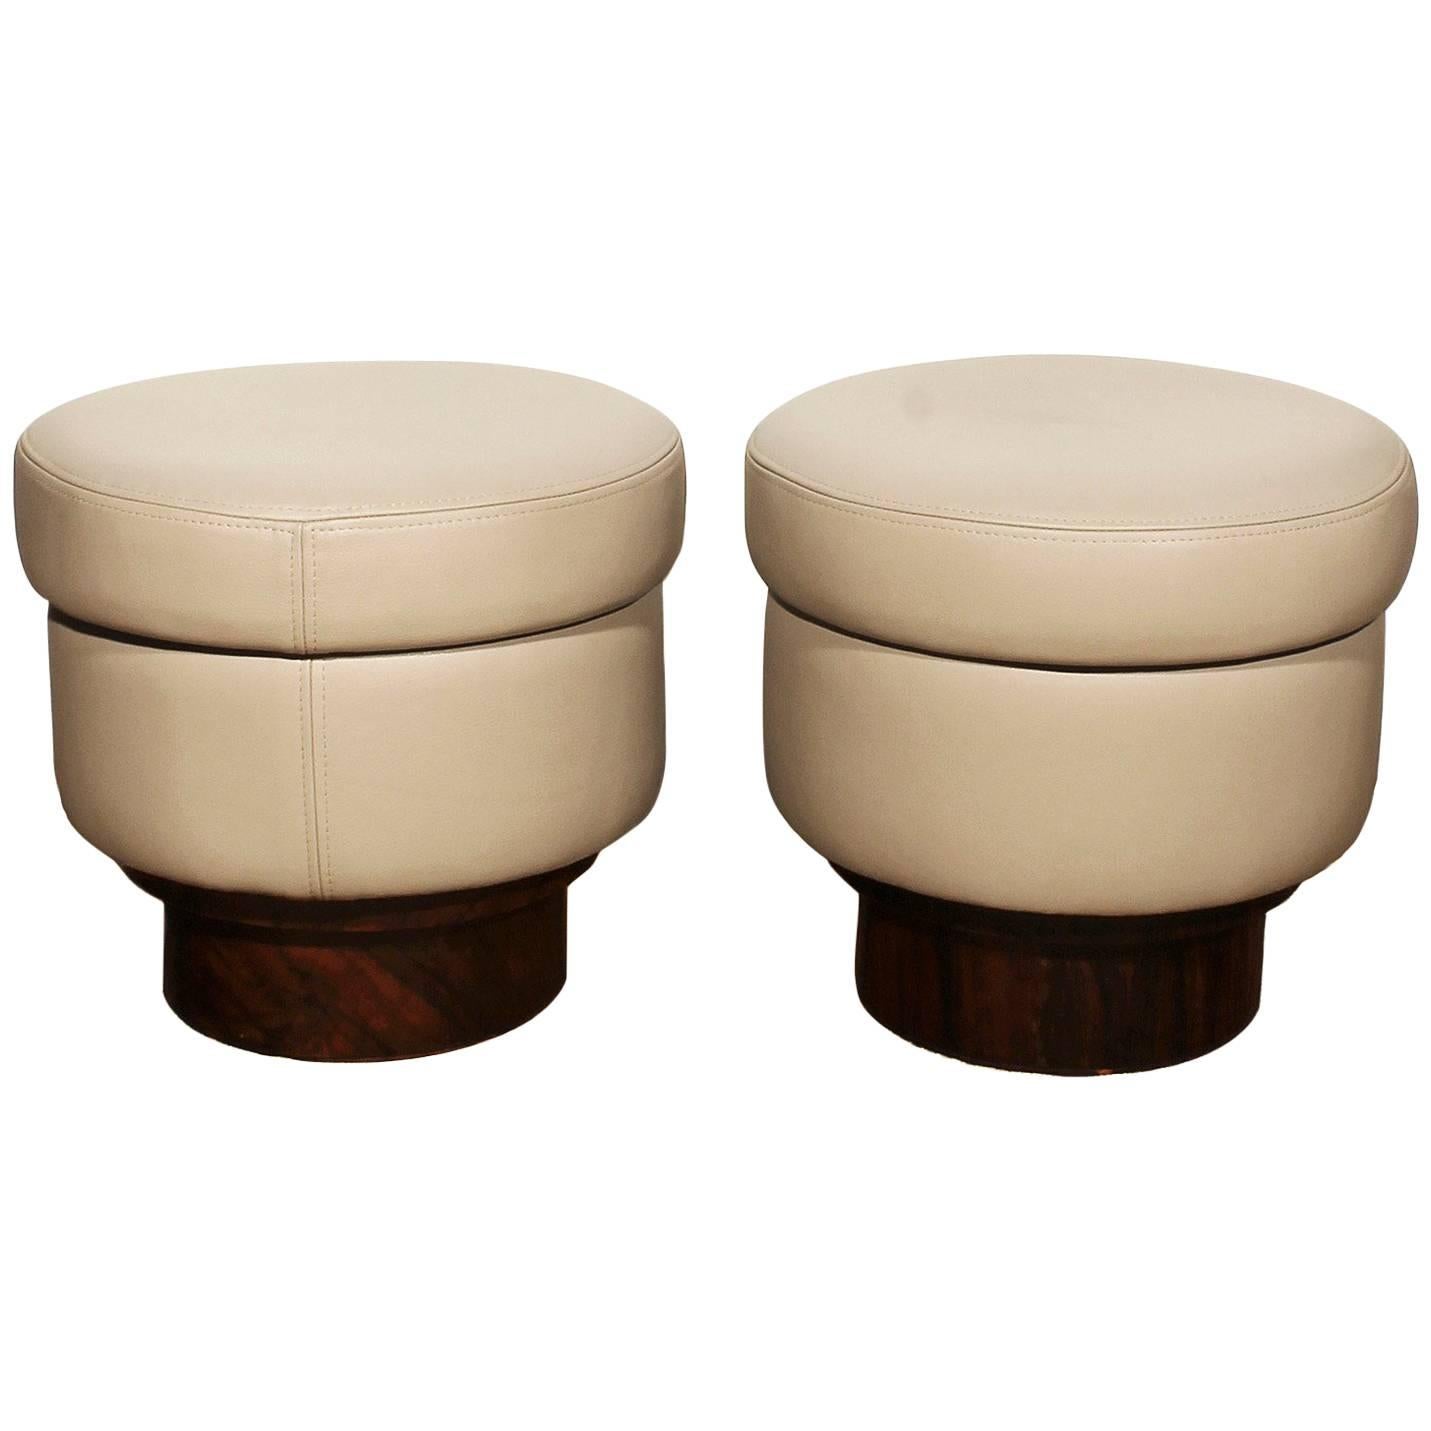 1940s Pair of Round Poufs, leather and mahogany veneer. Italy